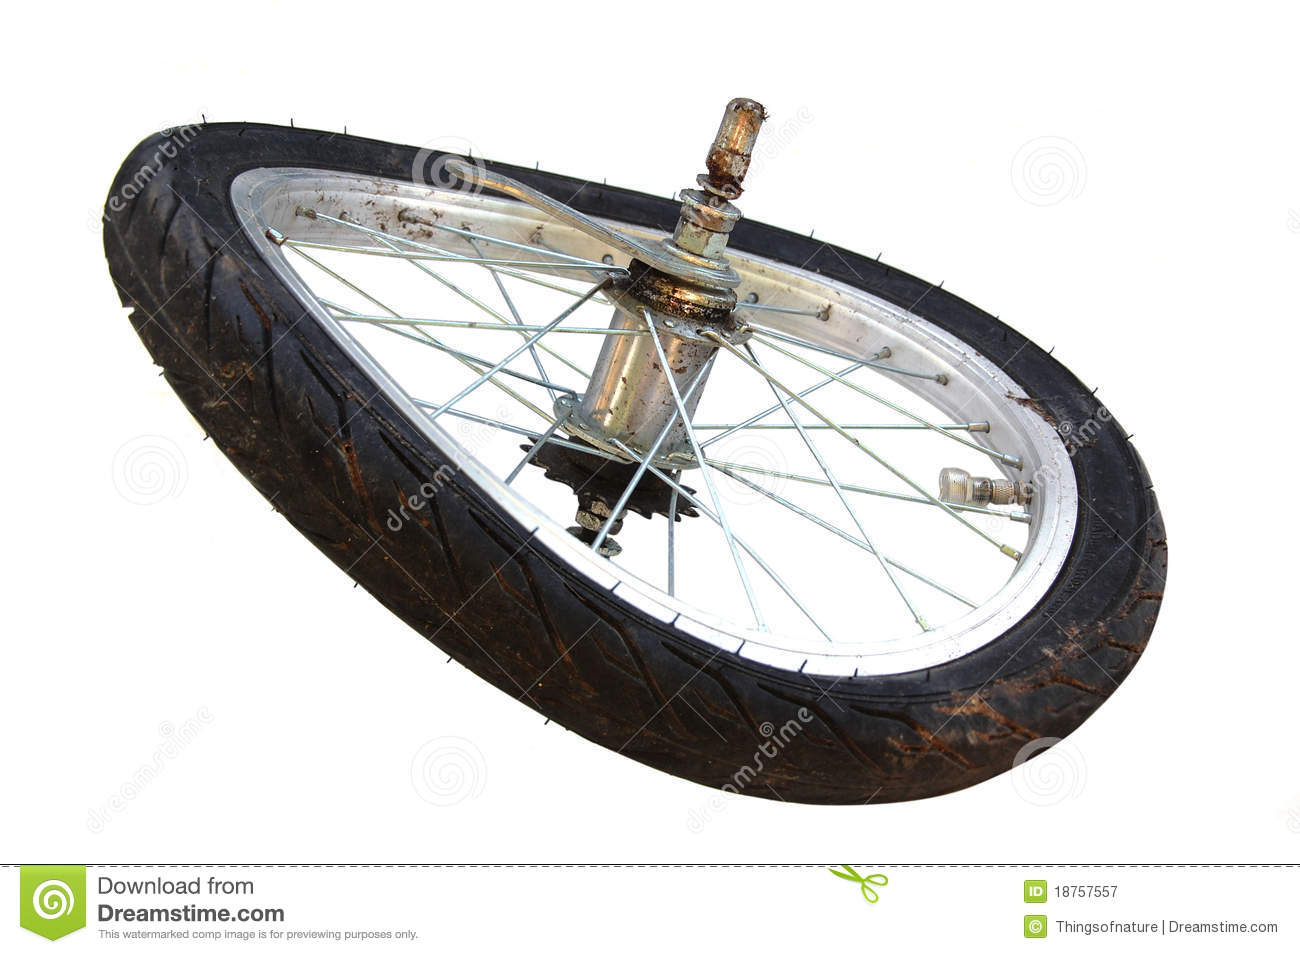 Flat Bike Tire Clipart Broken Bicycle Tire After